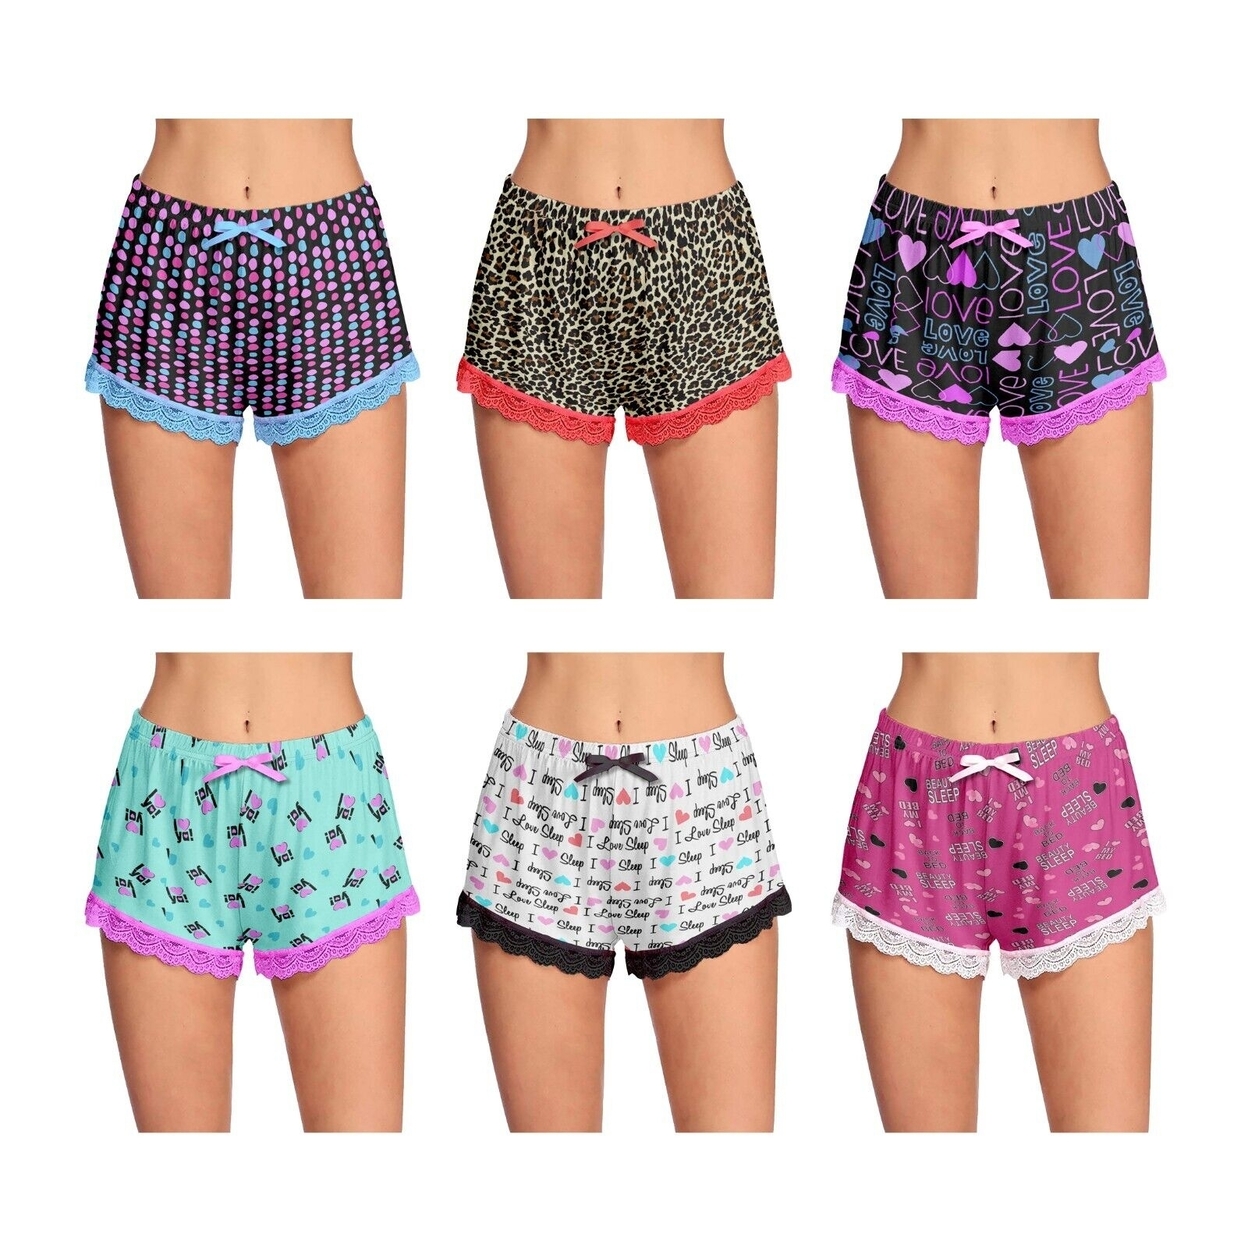 5-Pack: Women's Ultra-Soft Cozy Fun Printed Lace Trim Pajama Lounge Shorts - Small, Shapes